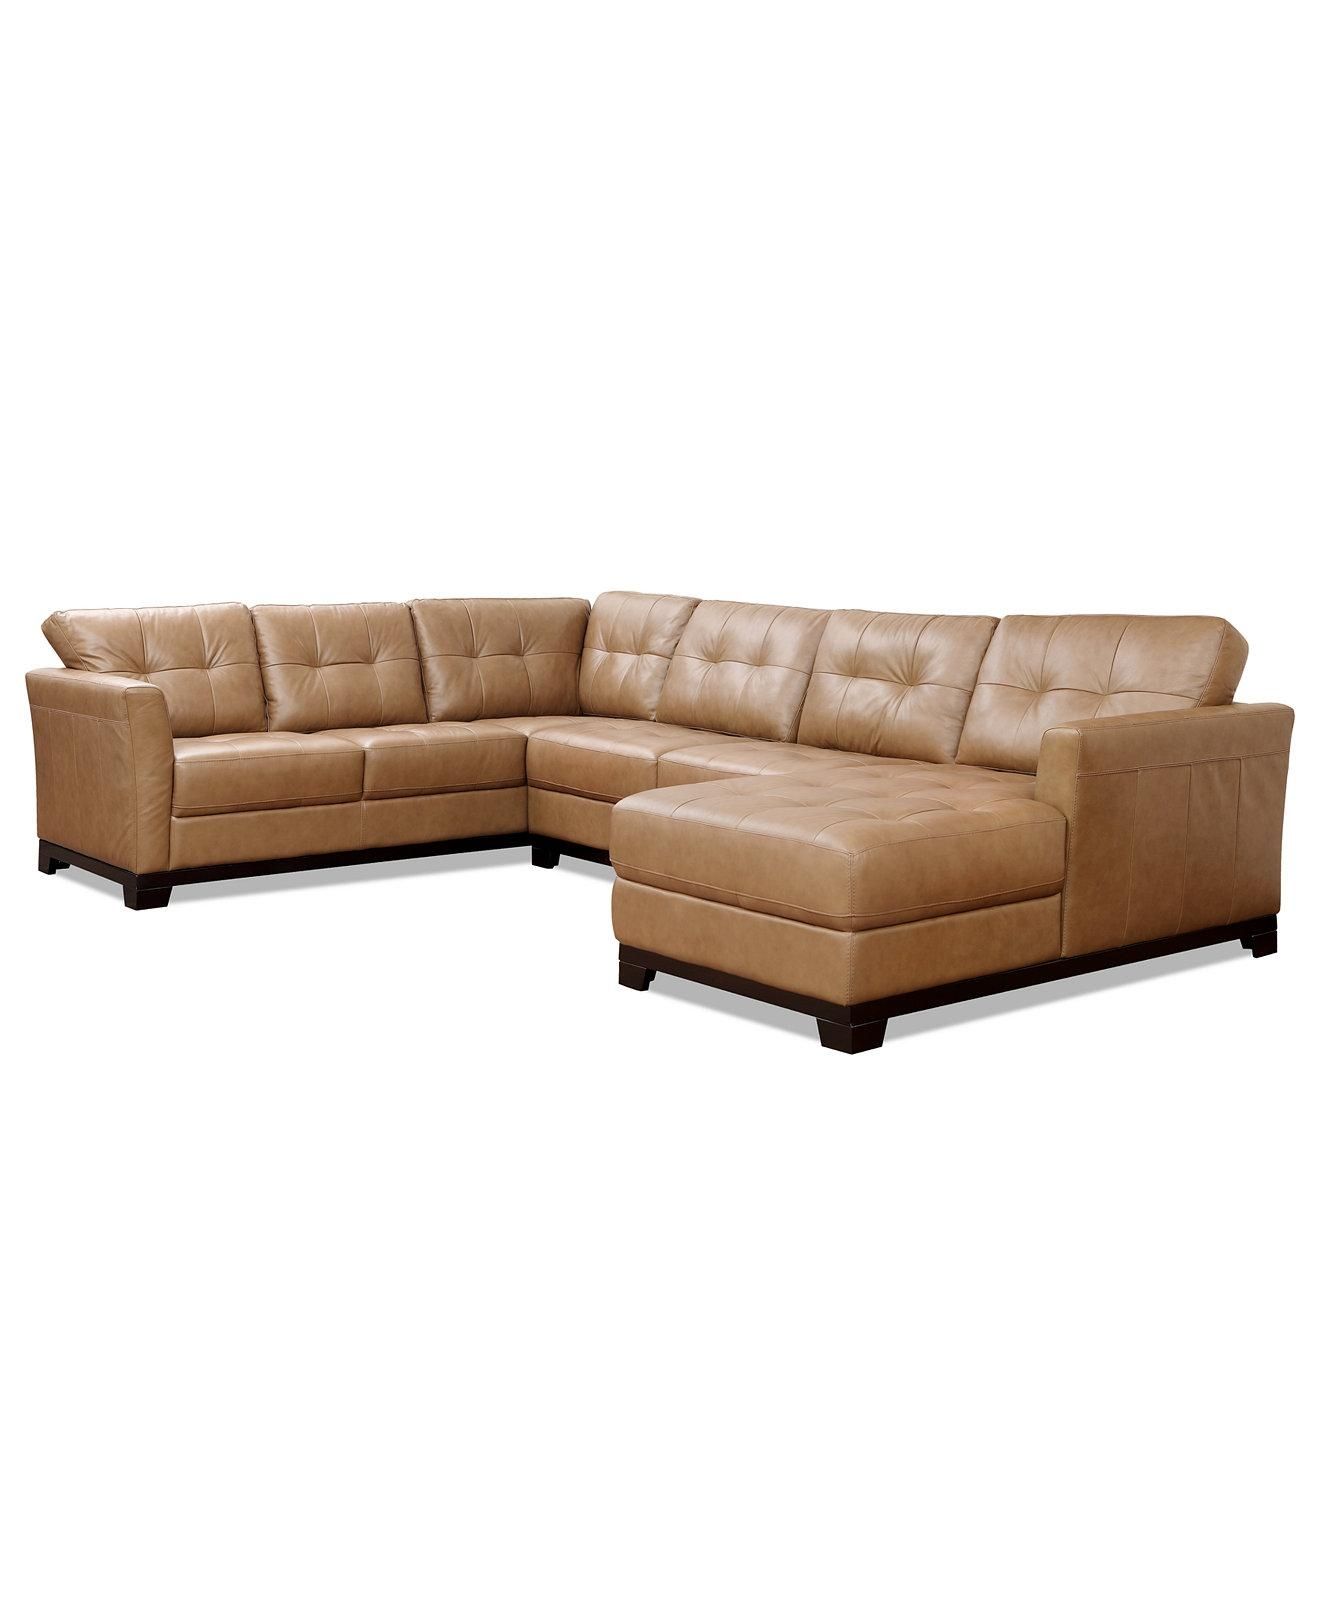 Sectional Sofas Macys 41 With Sectional Sofas Macys | Jinanhongyu Throughout Macys Leather Sofas Sectionals (Photo 1 of 20)